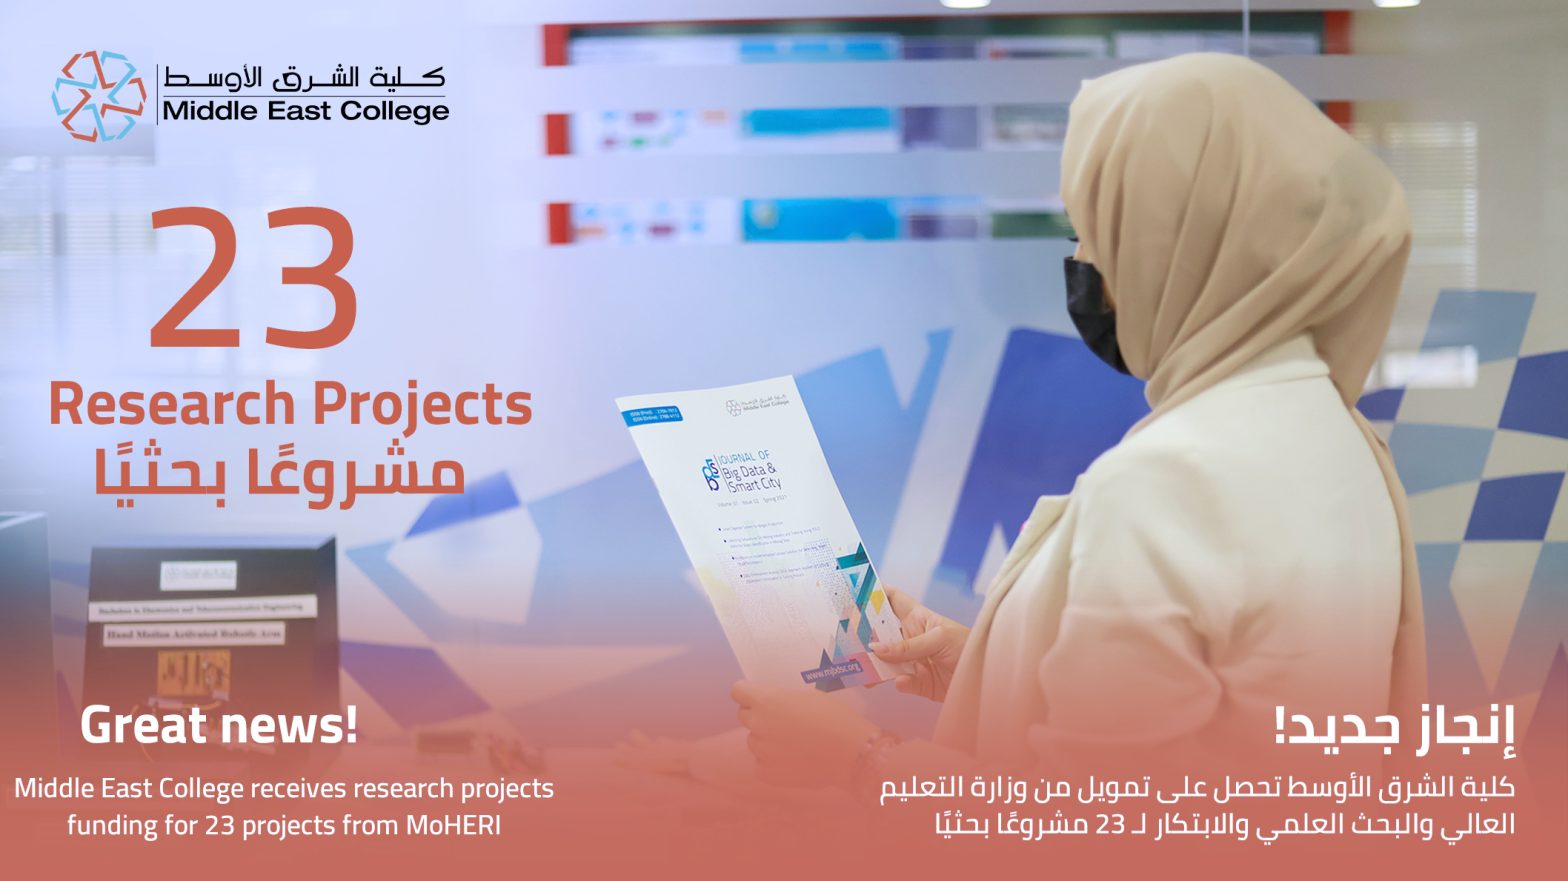 Middle East College receives research funding for 23 projects from MoHERI